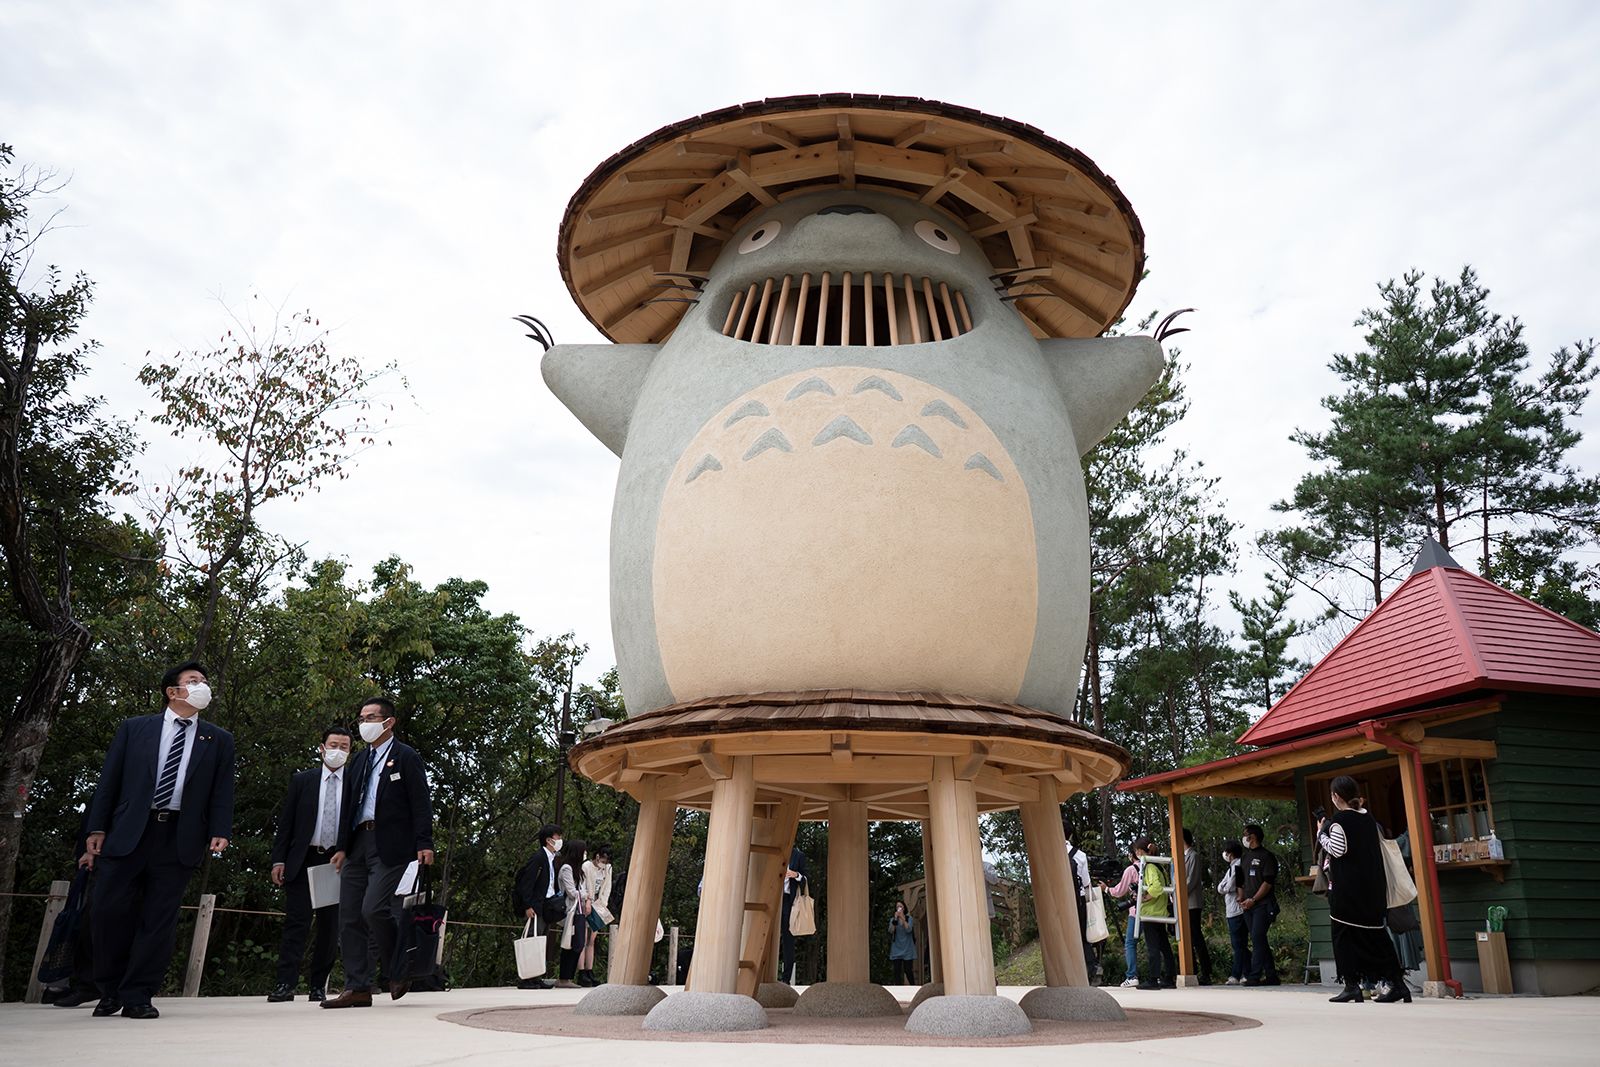 A first look inside Japan's new Ghibli Park - The Japan Times